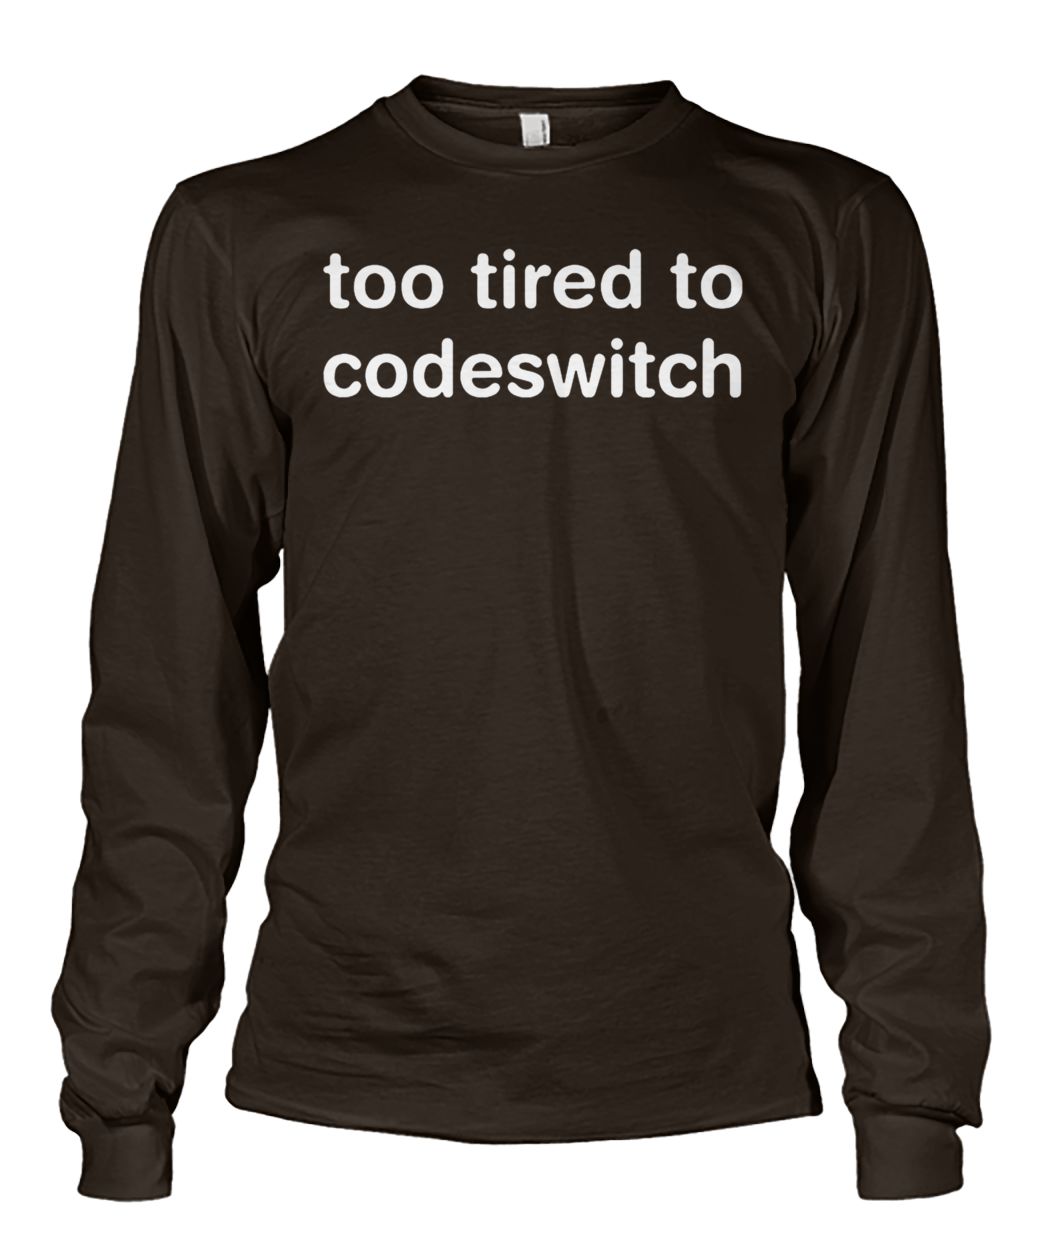 Too tired to codeswitch unisex long sleeve